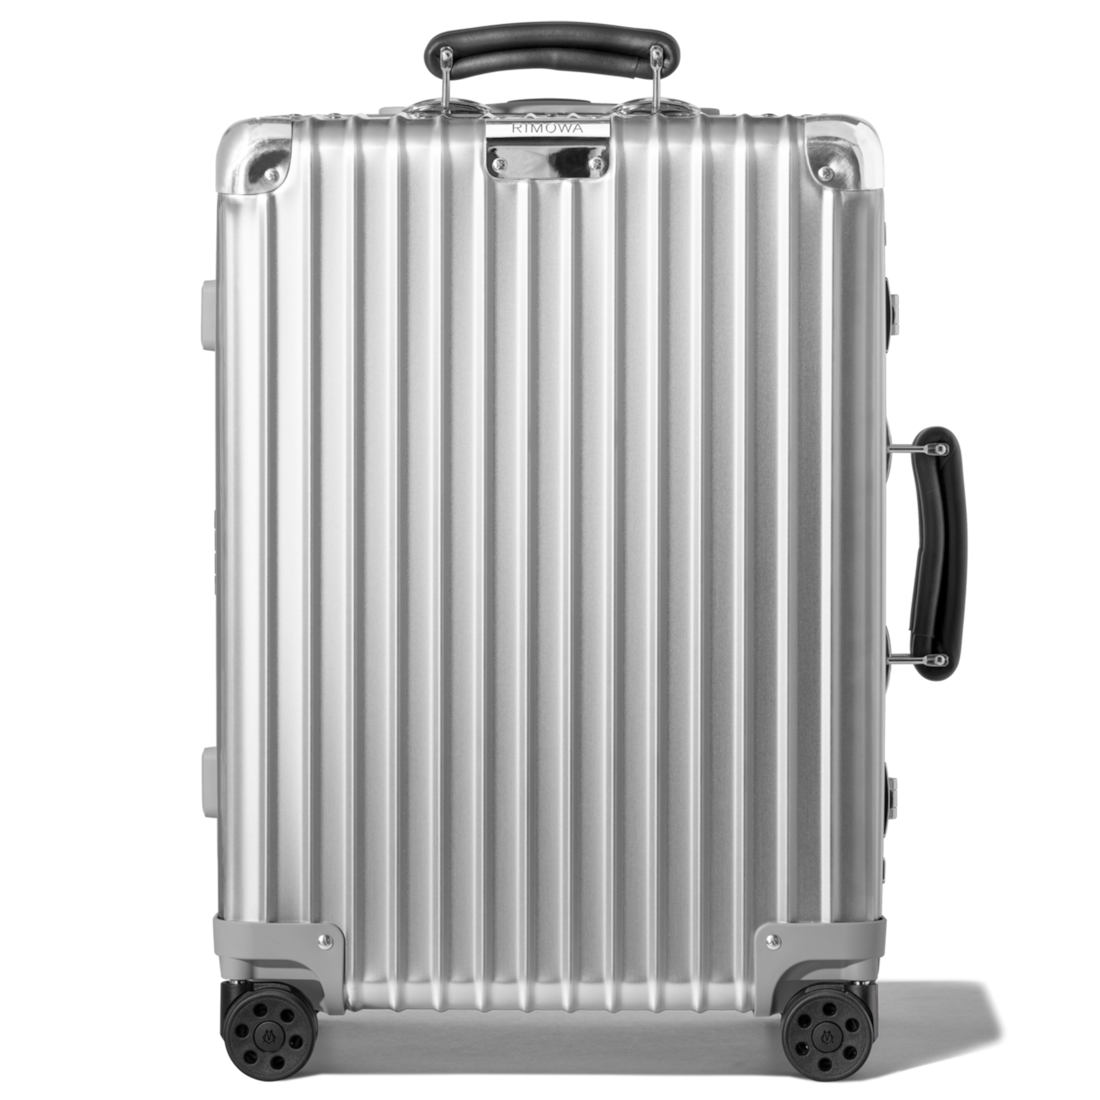 Rimowa Cabin Classic luxury carry-on